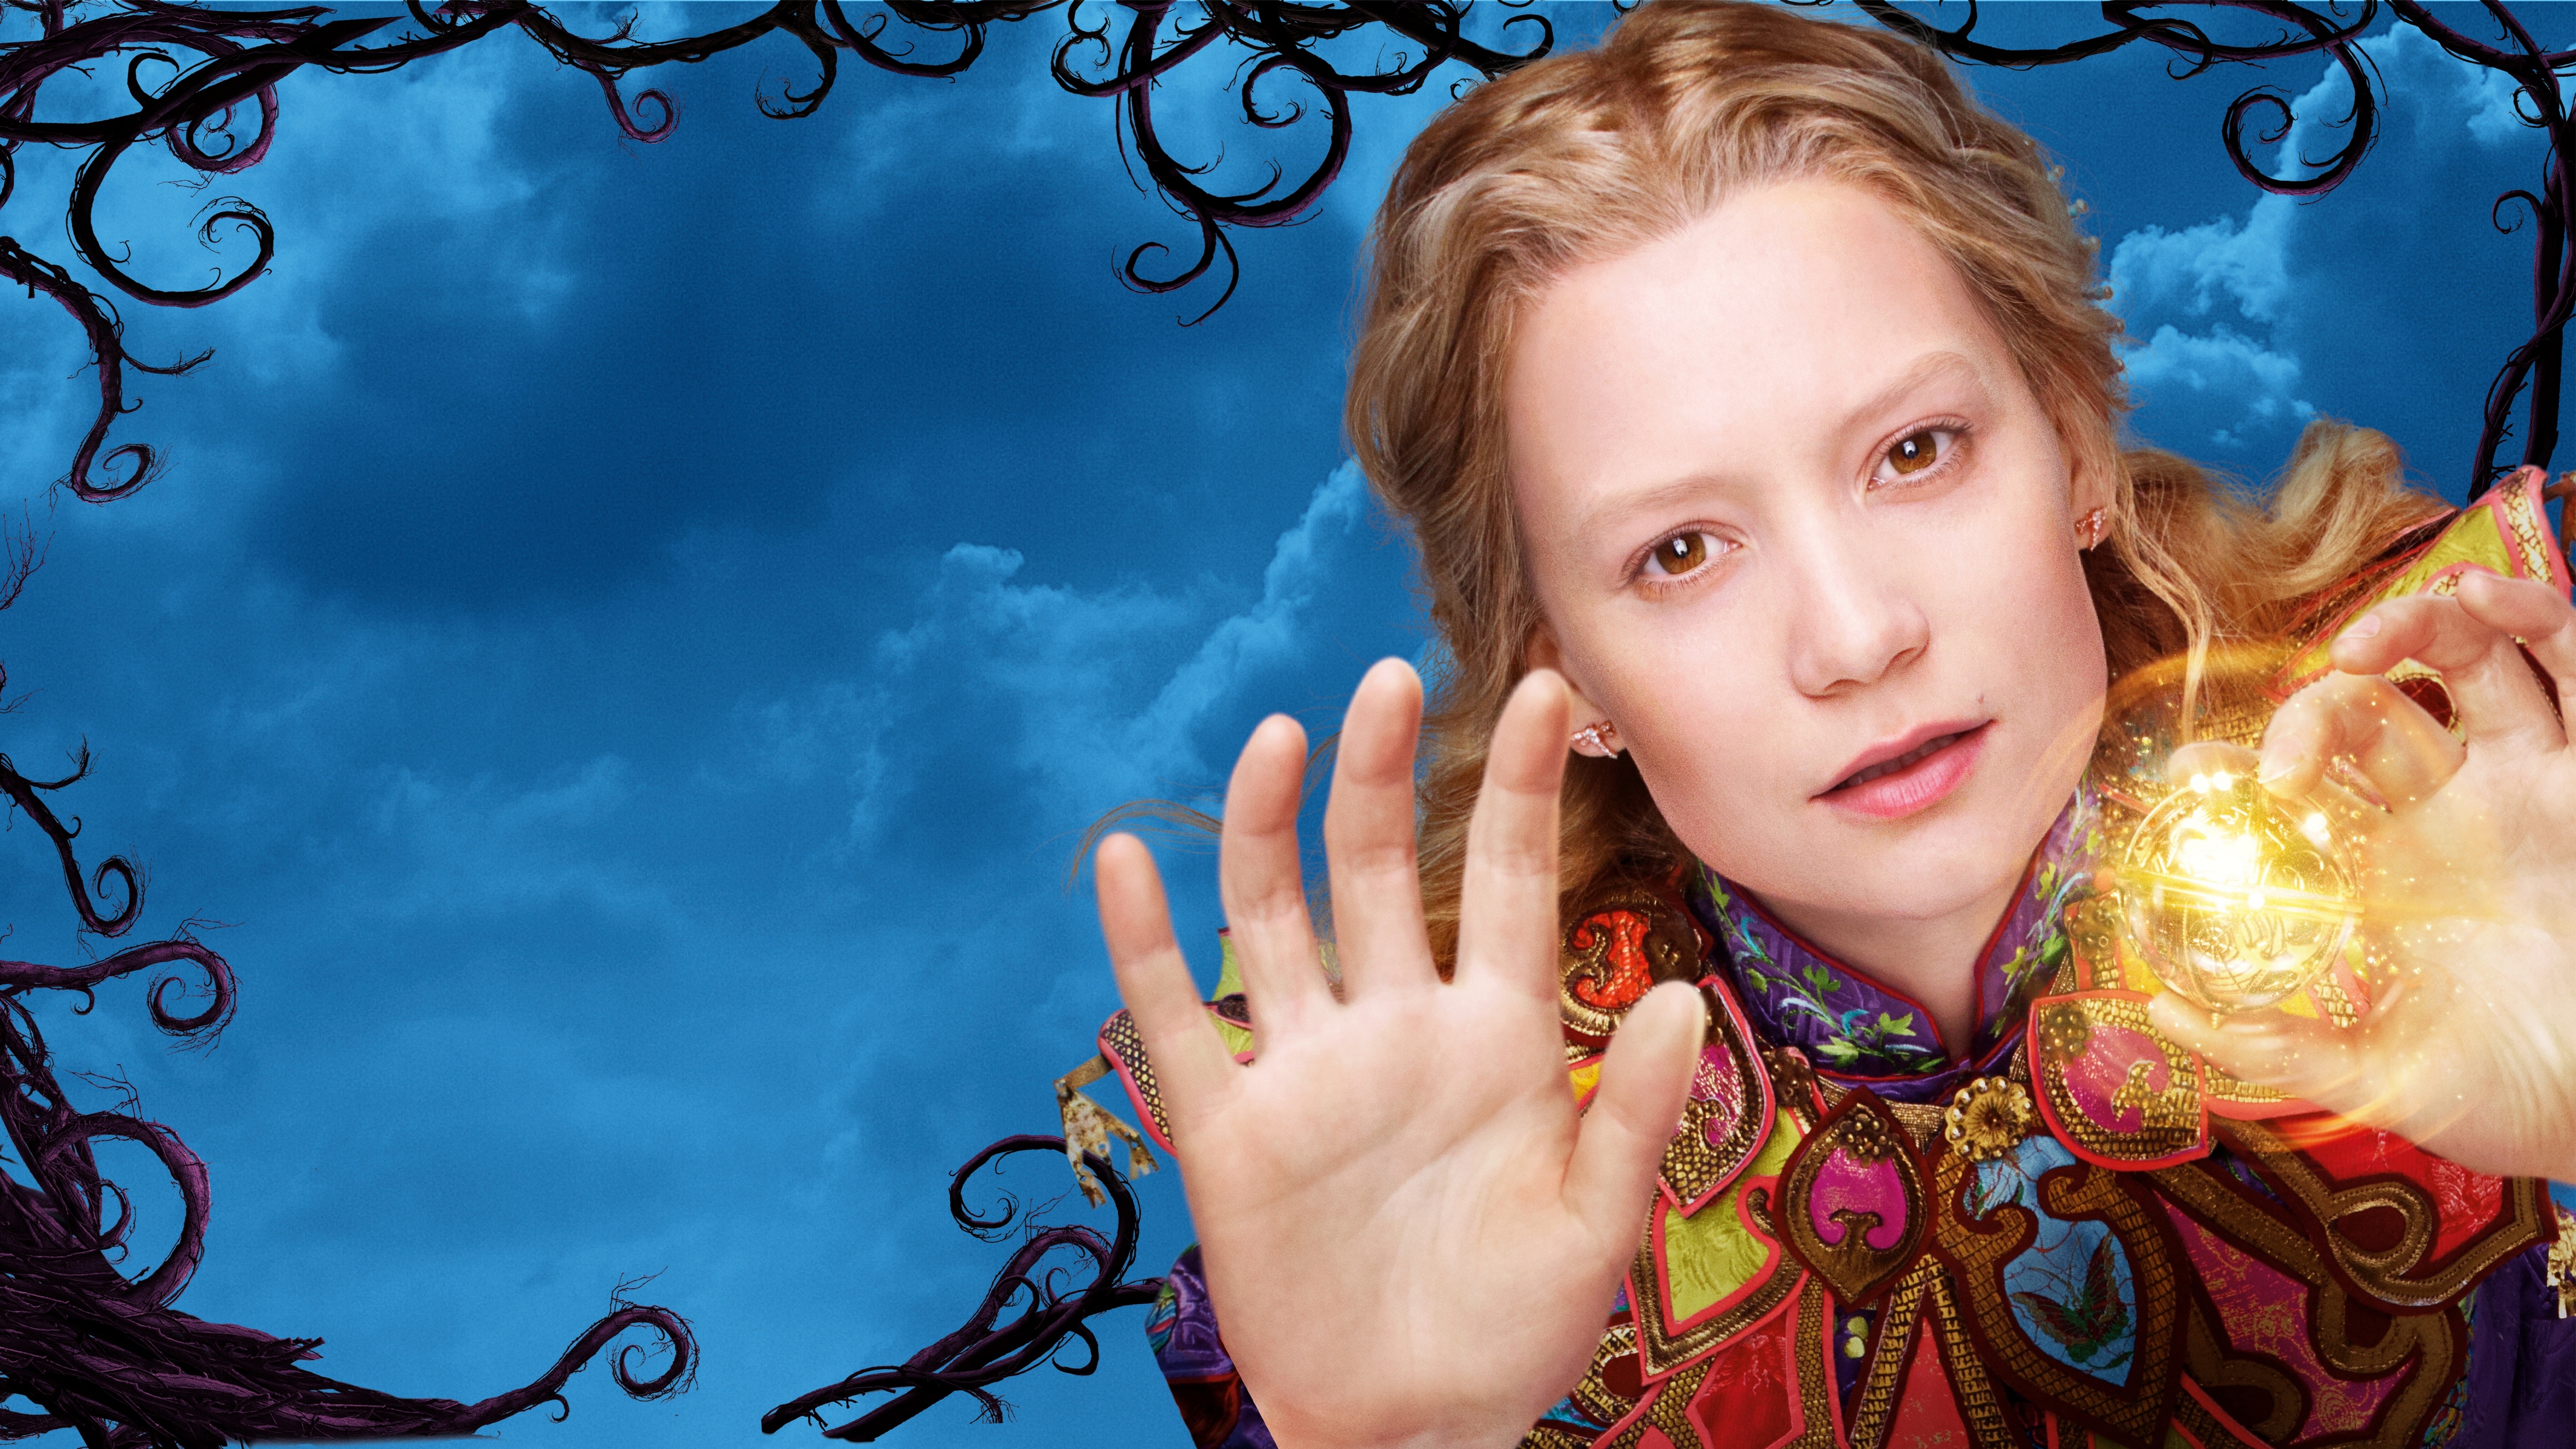 Windrises Image Alice Through The Looking Glass HD Wallpaper And